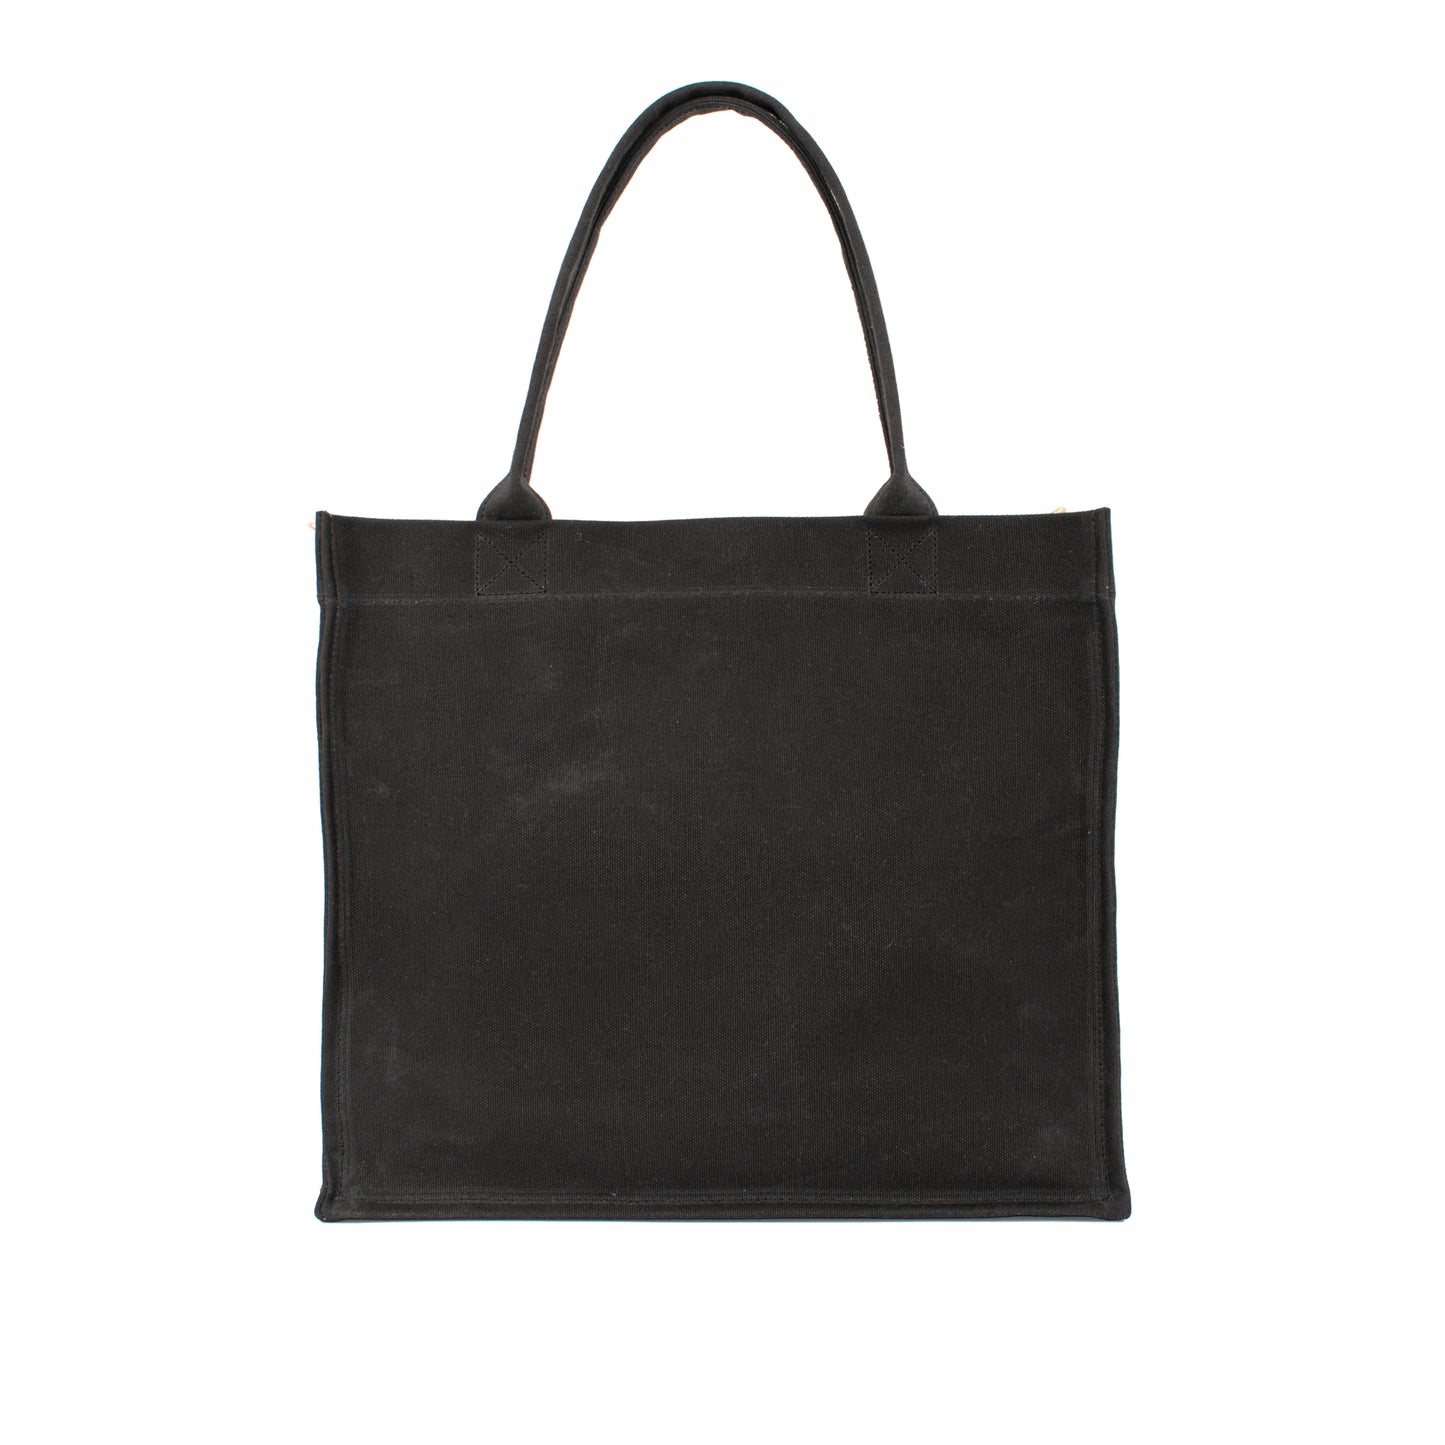 HCANSS BLACK WAXED CANVAS LARGE TOTE BAG